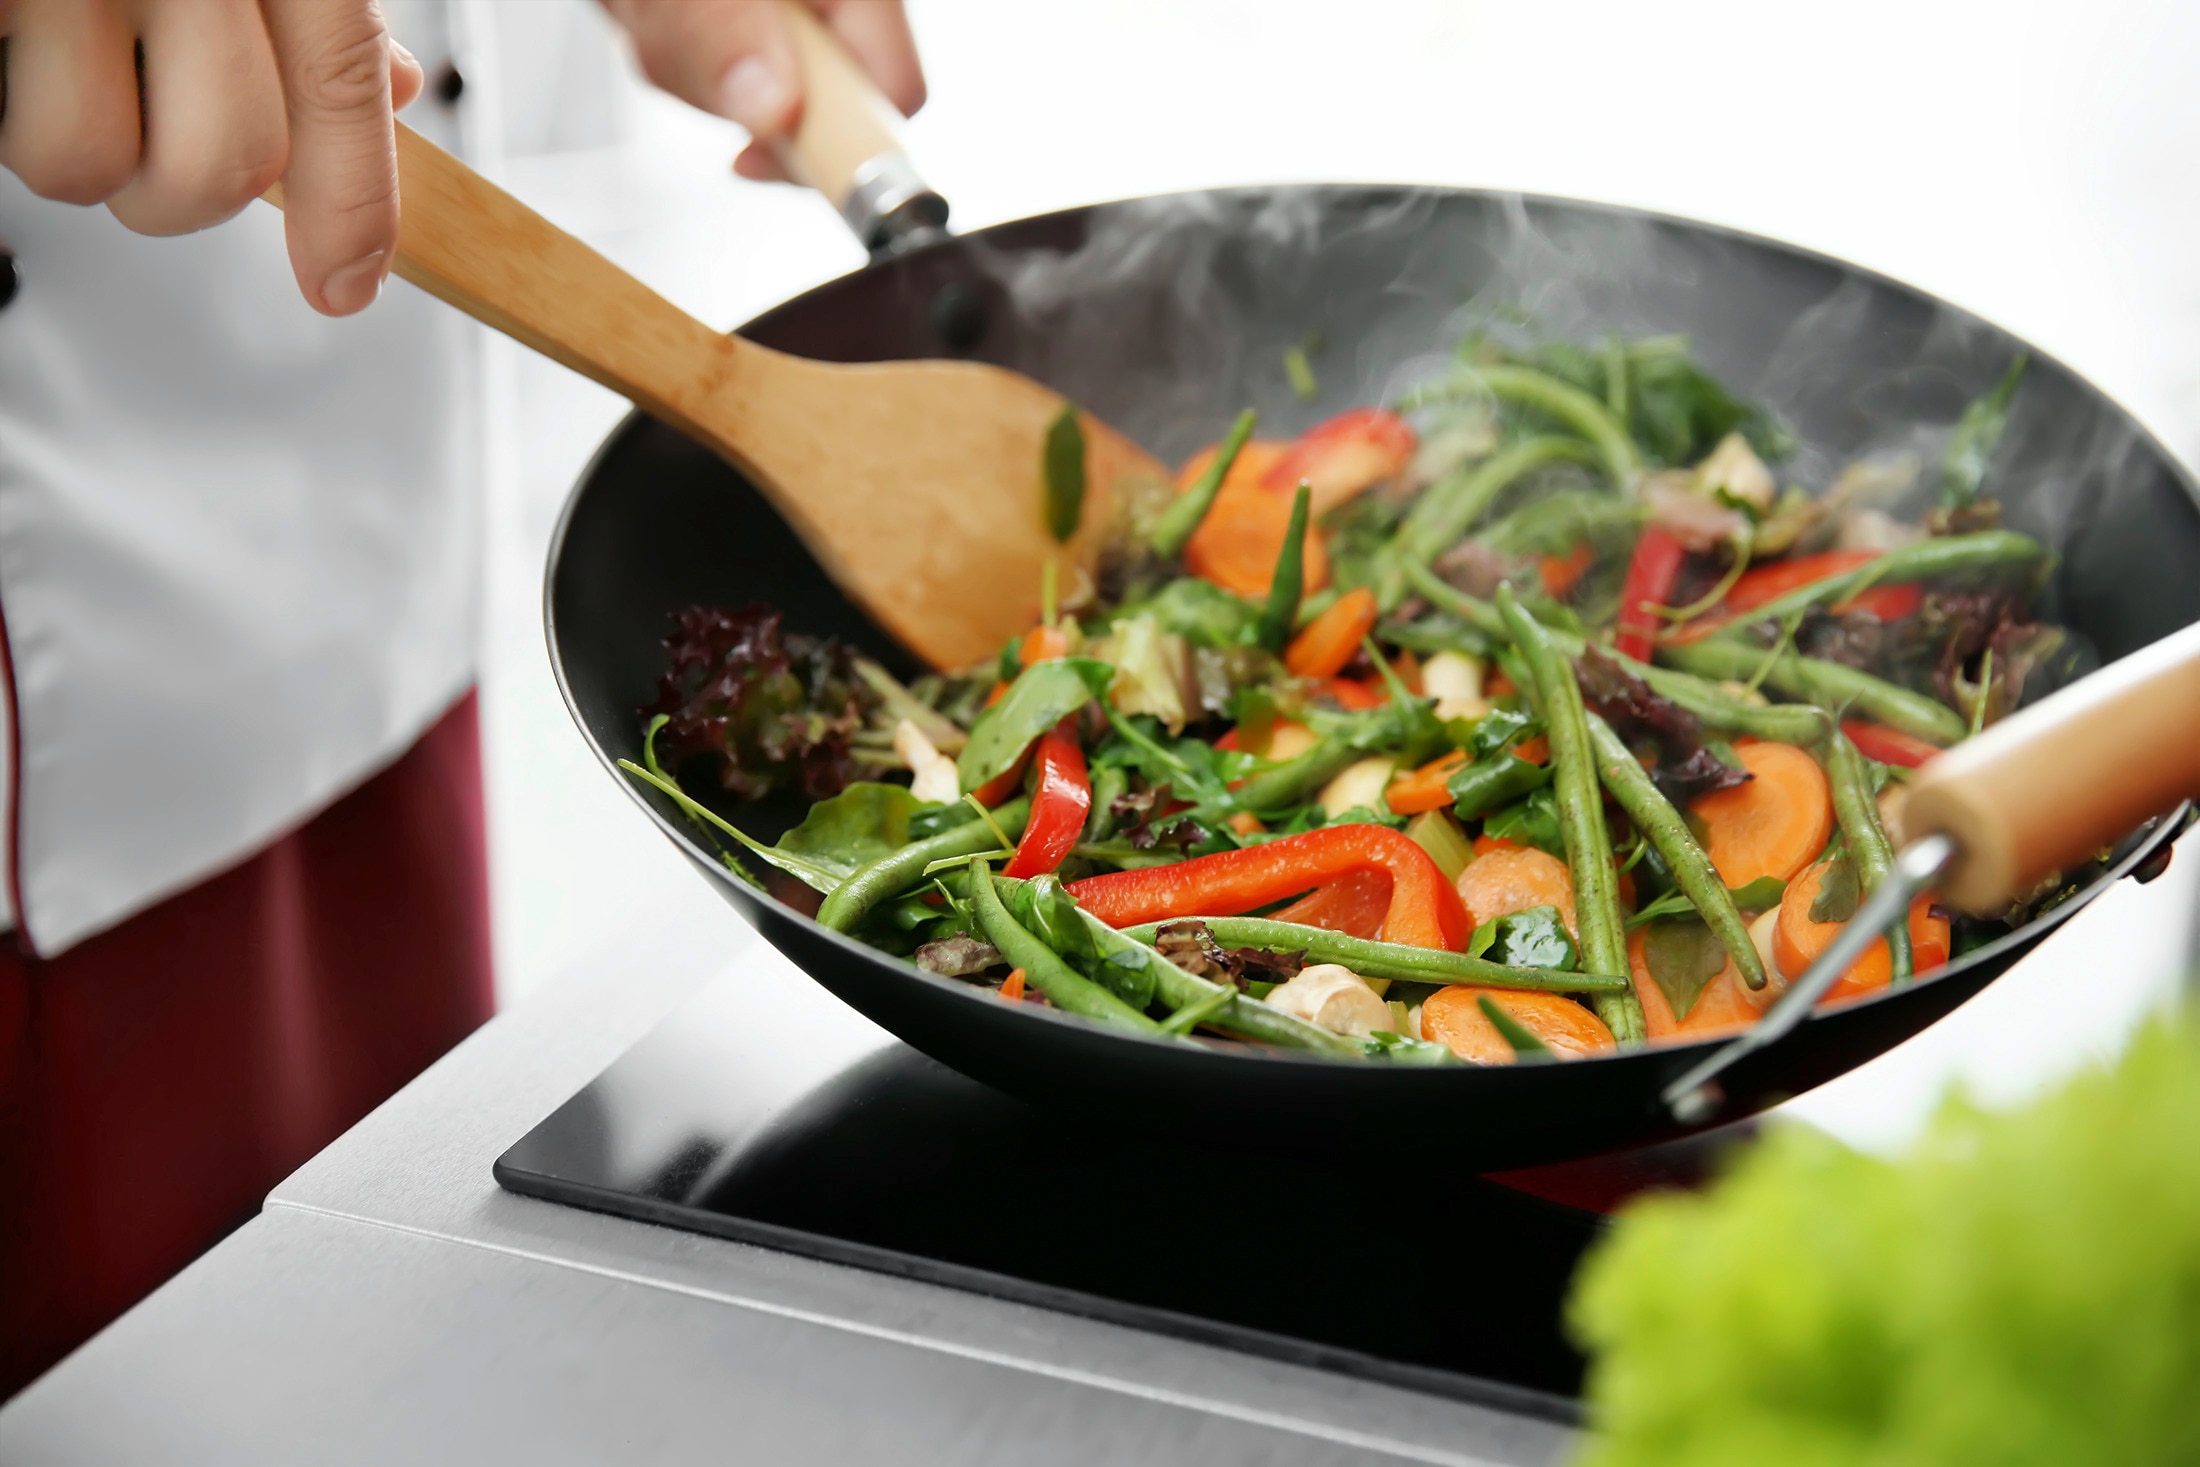 A cook tossing vegetables in a searing hot wok